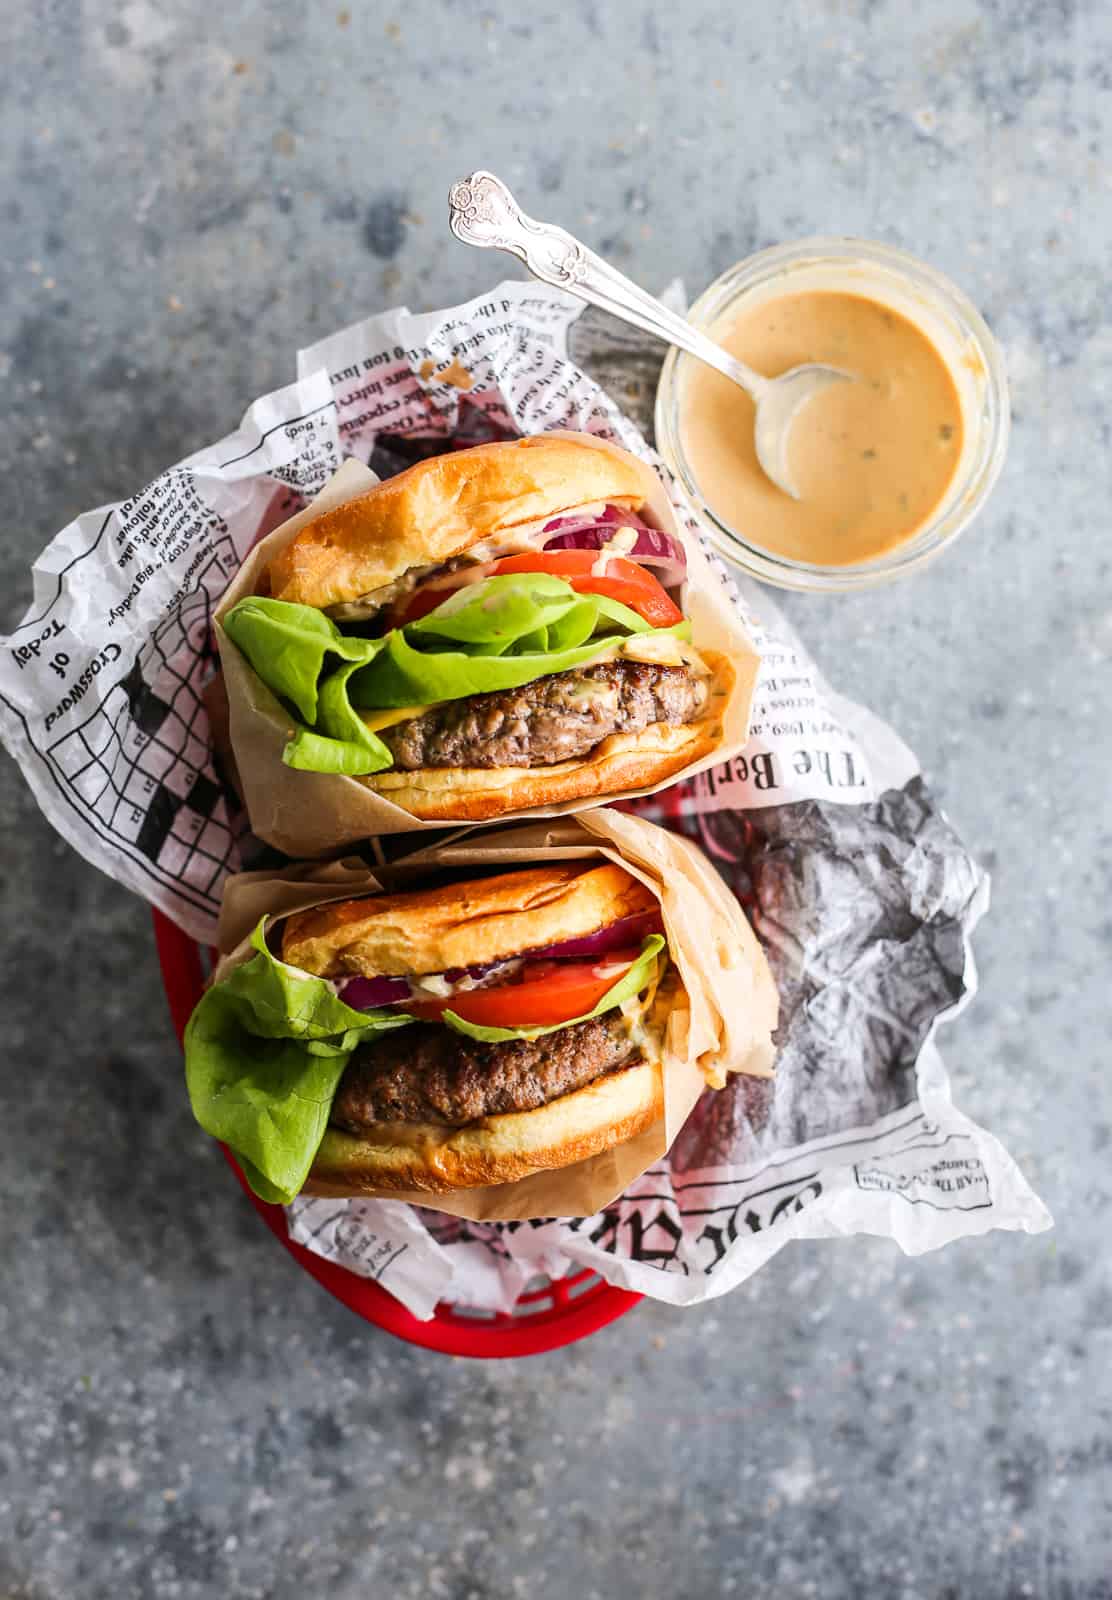 Juicy Indoor Burgers With Burger Sauce The Defined Dish